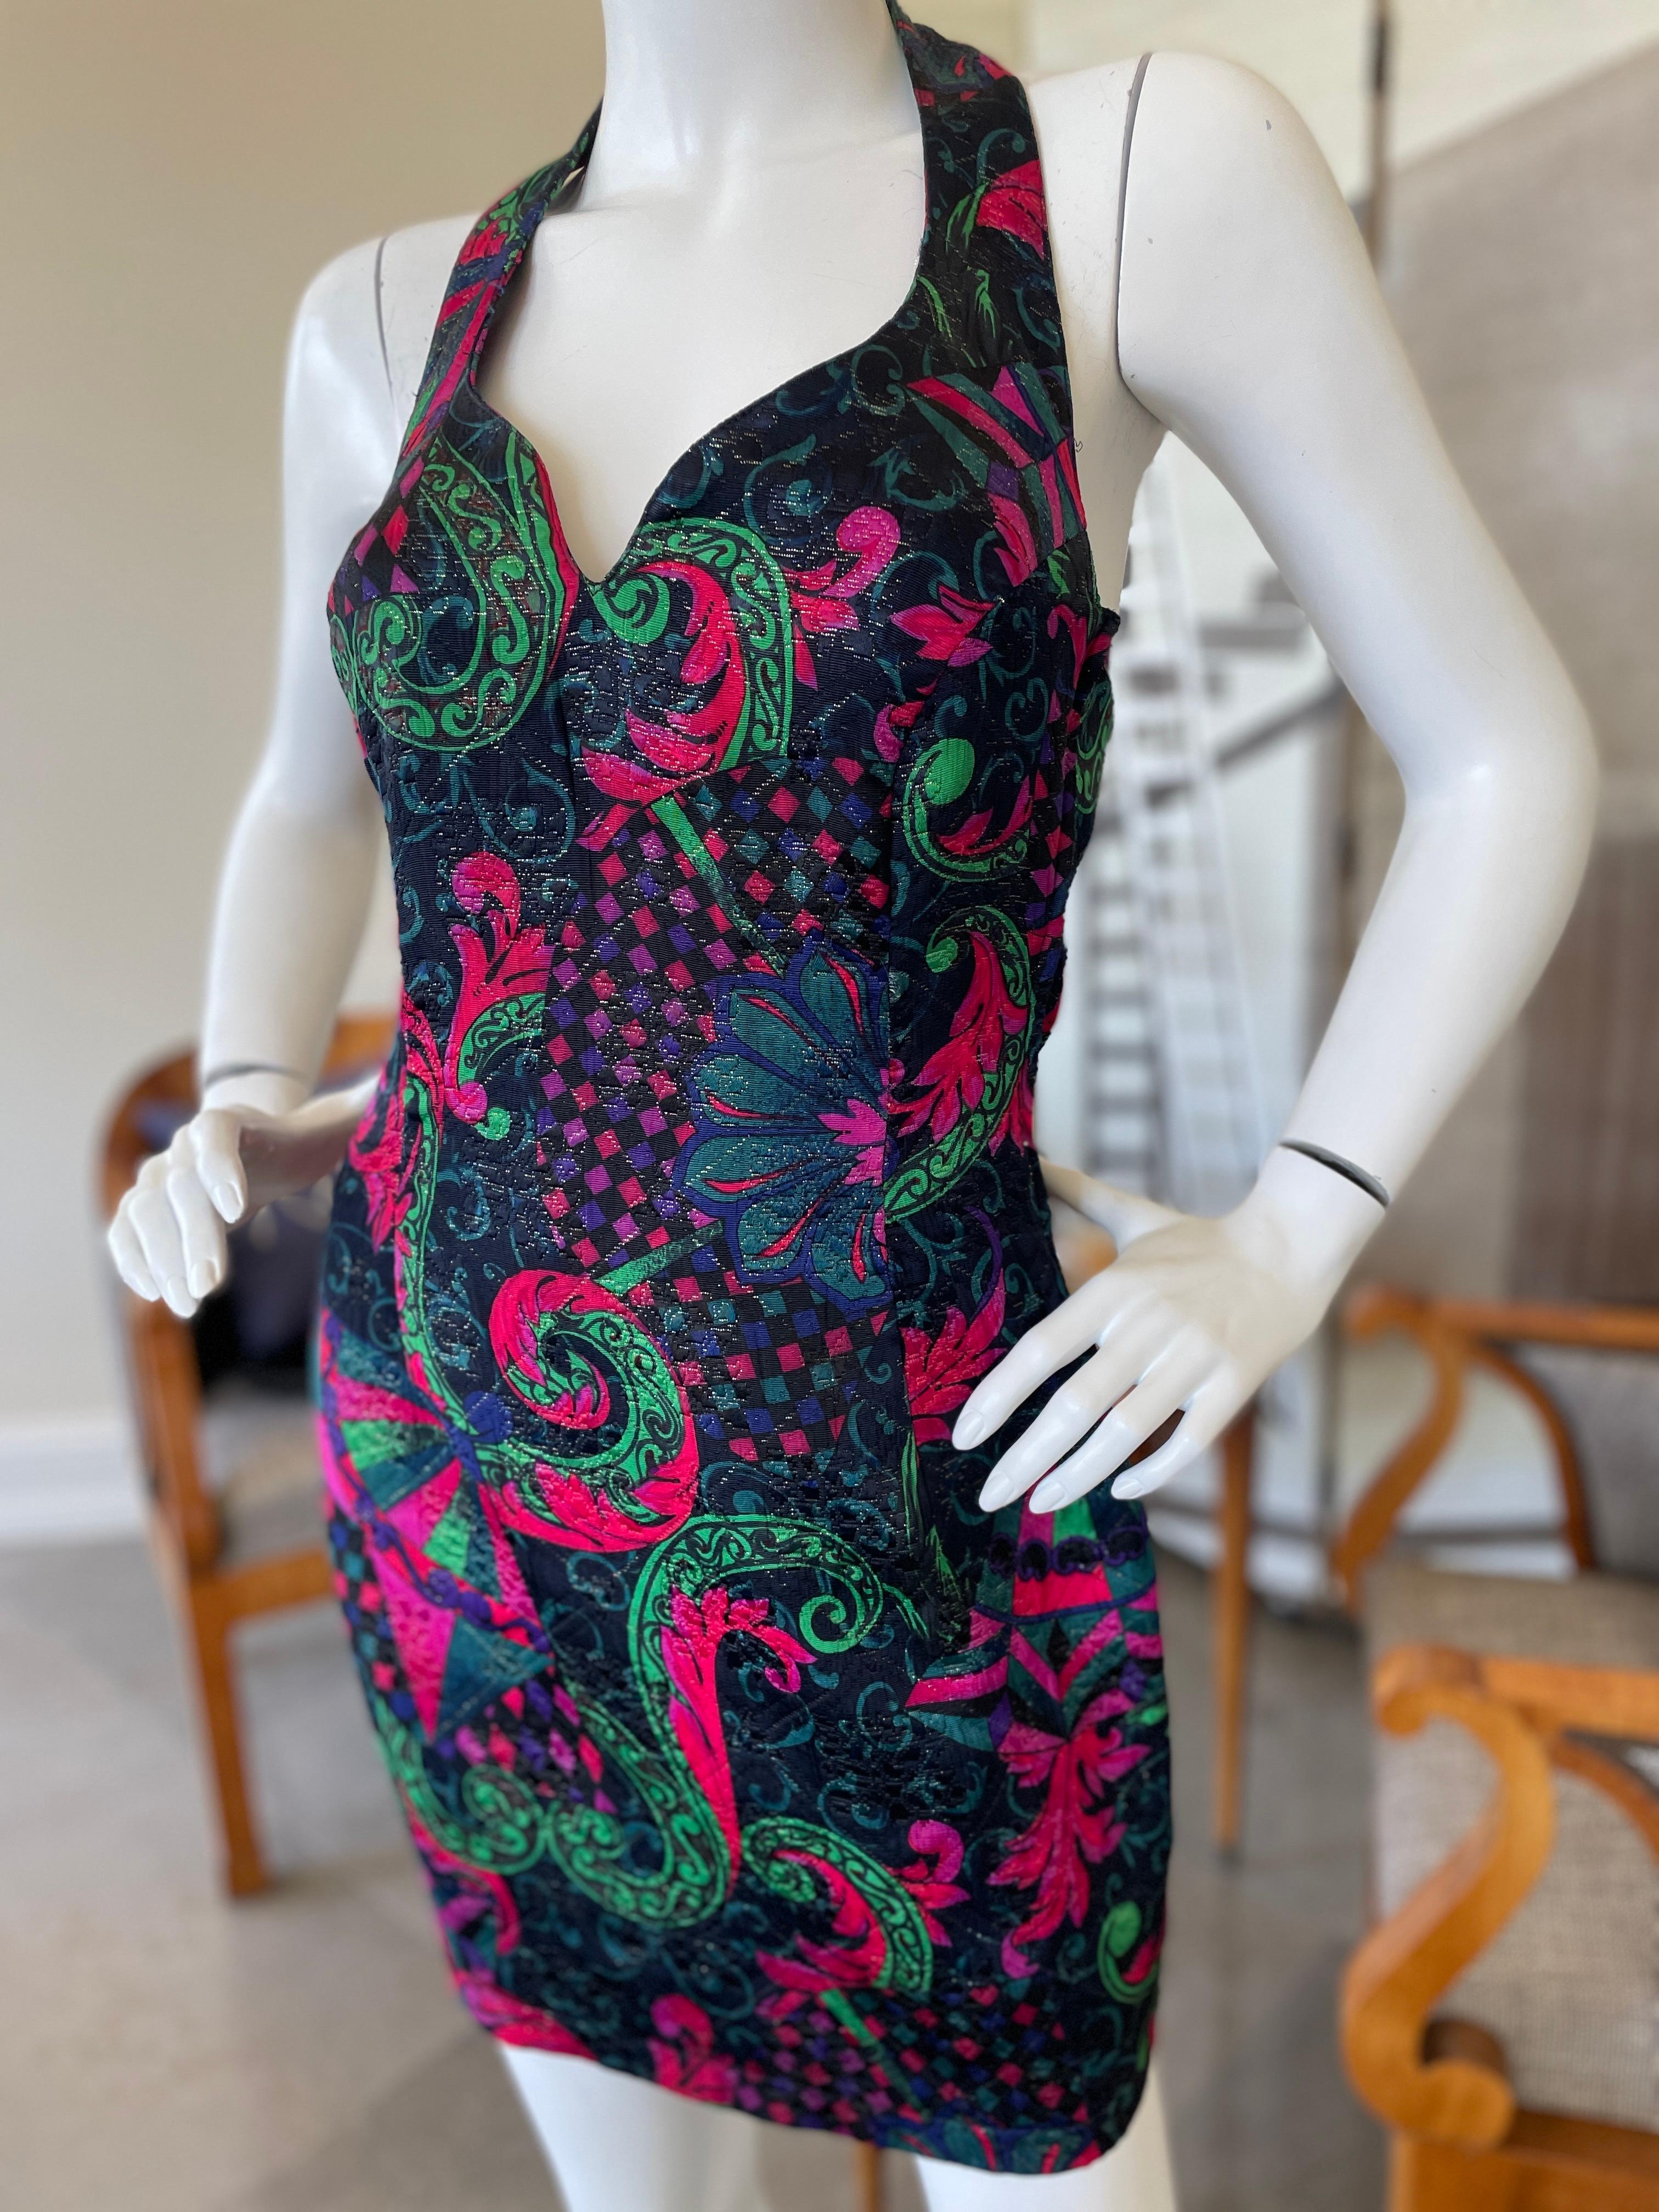 Gianni Versace for Versus Vintage Baroque Glitter Pattern Dress  In Excellent Condition For Sale In Cloverdale, CA